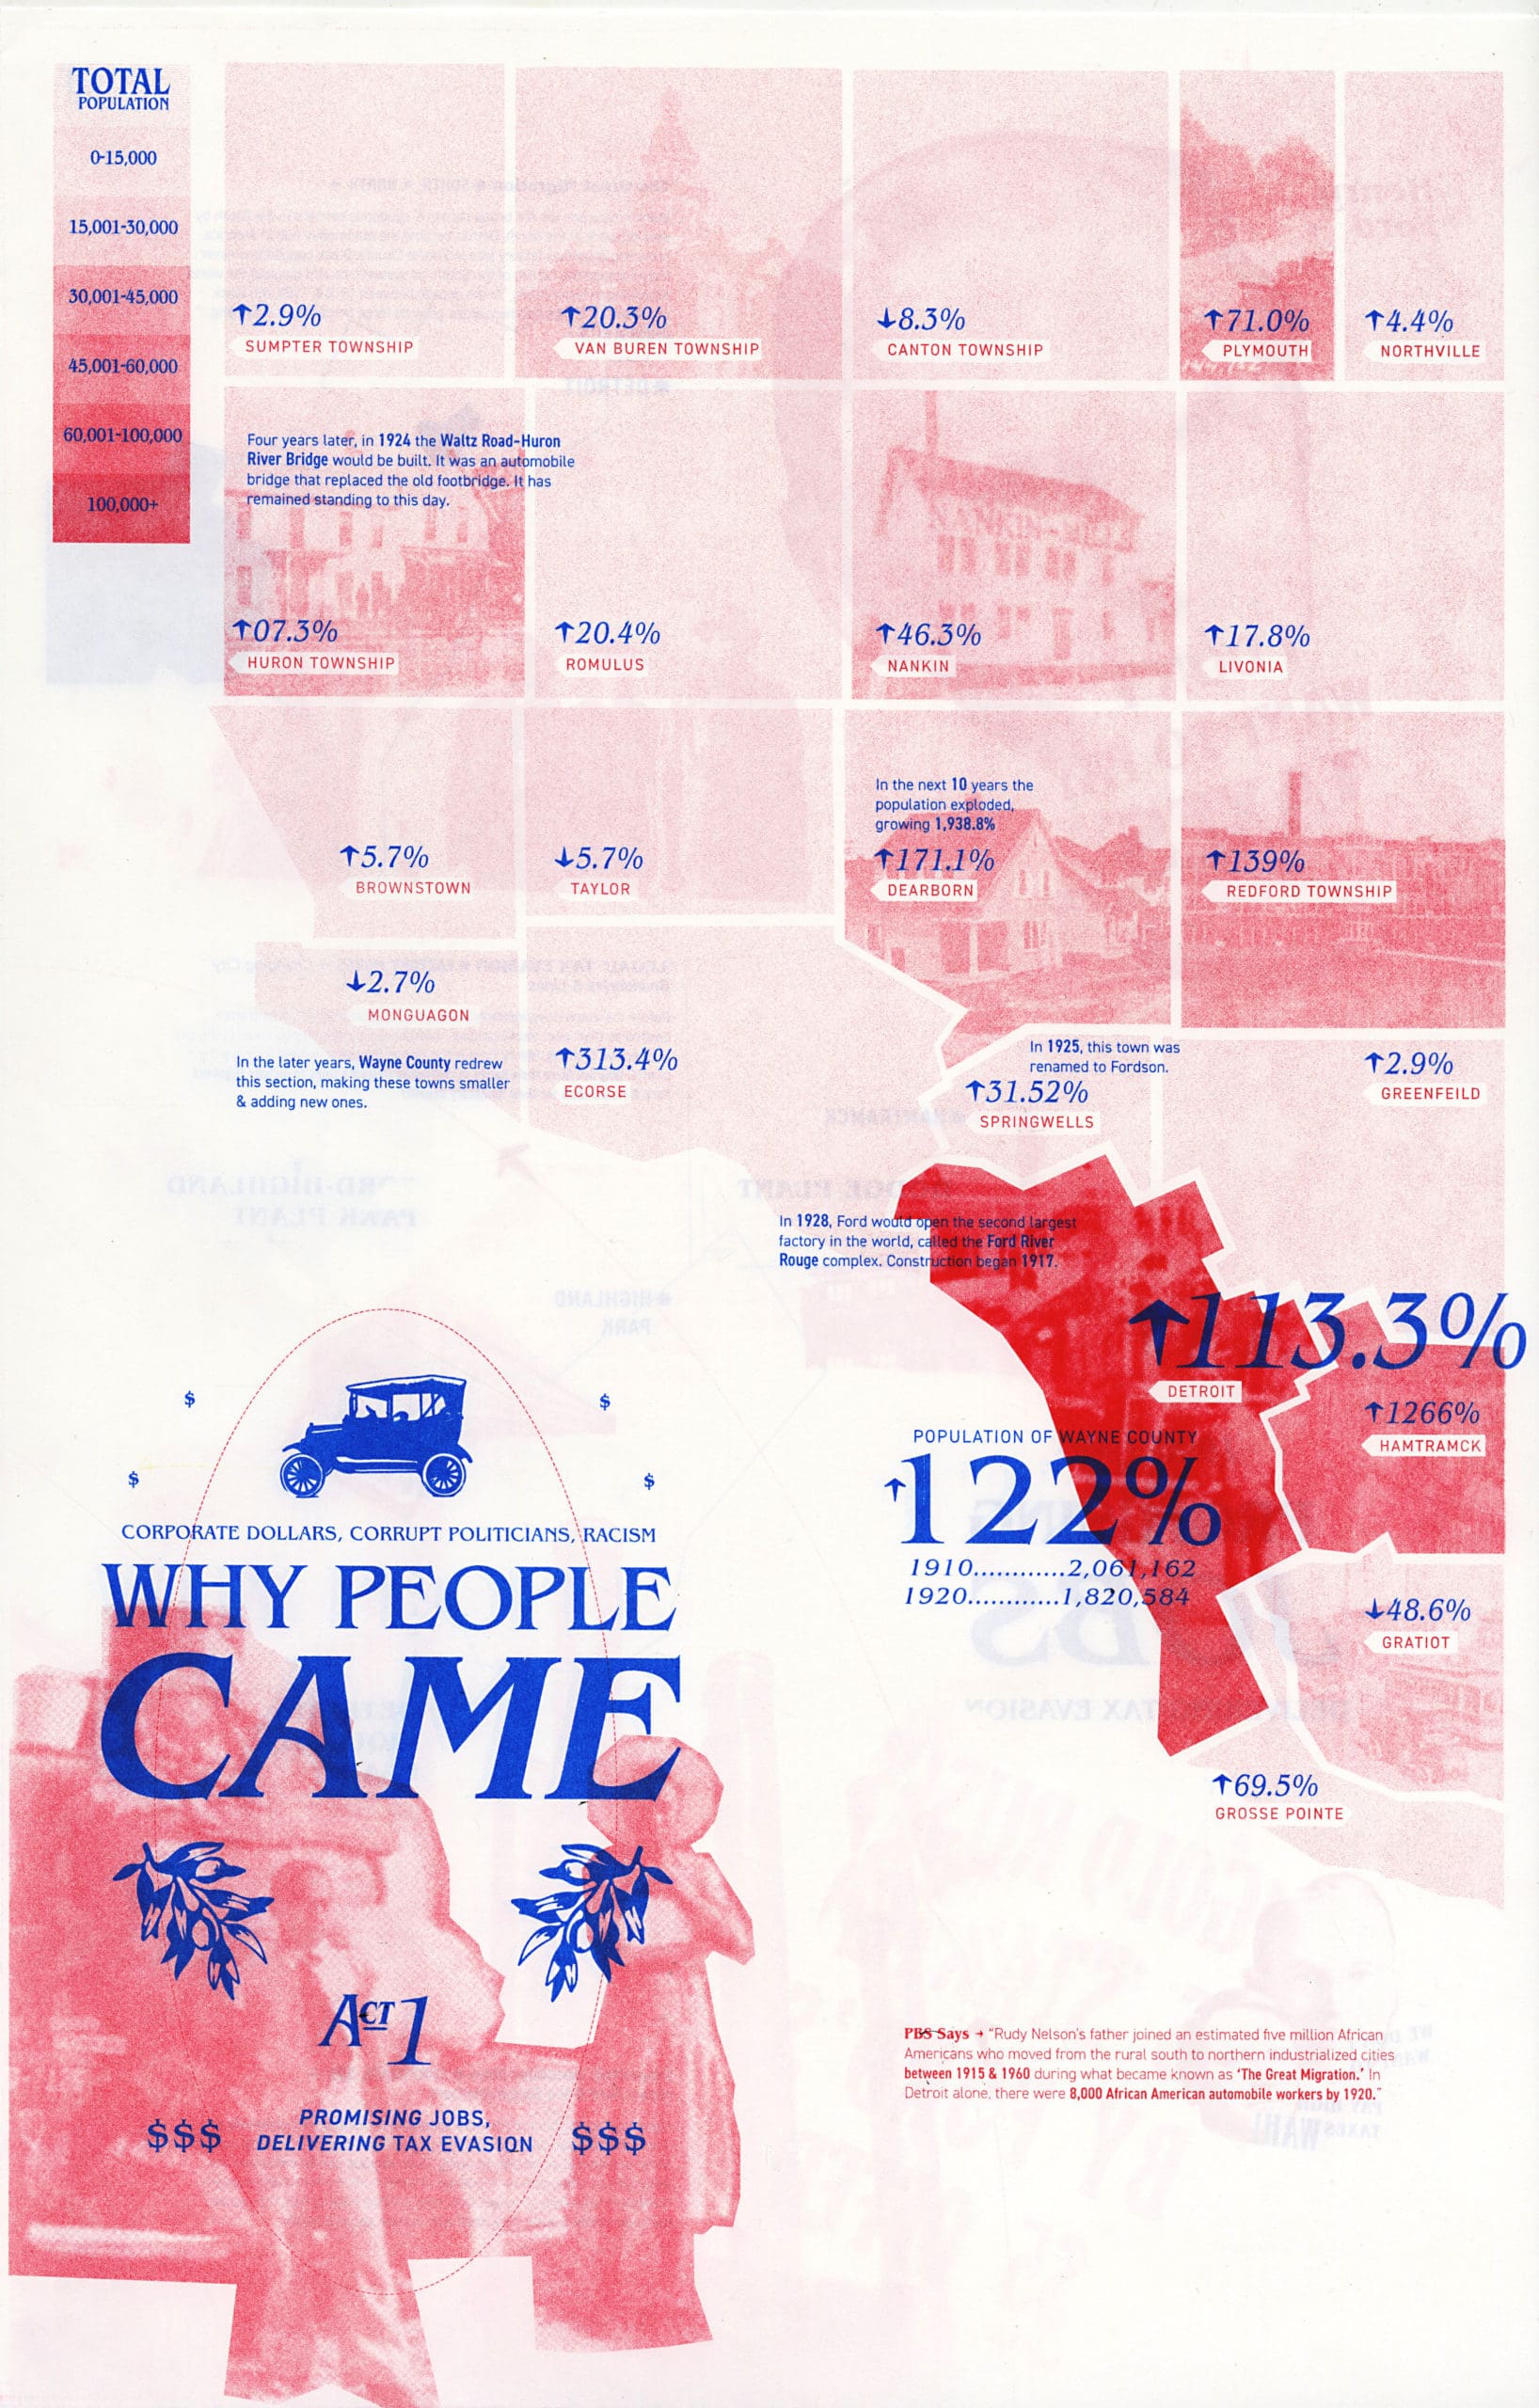 Detroit History Riso Prints. Red and blue ink on white paper. The most notable details are a blue title reading "Why people came" and a series of red images and statistics at the top.